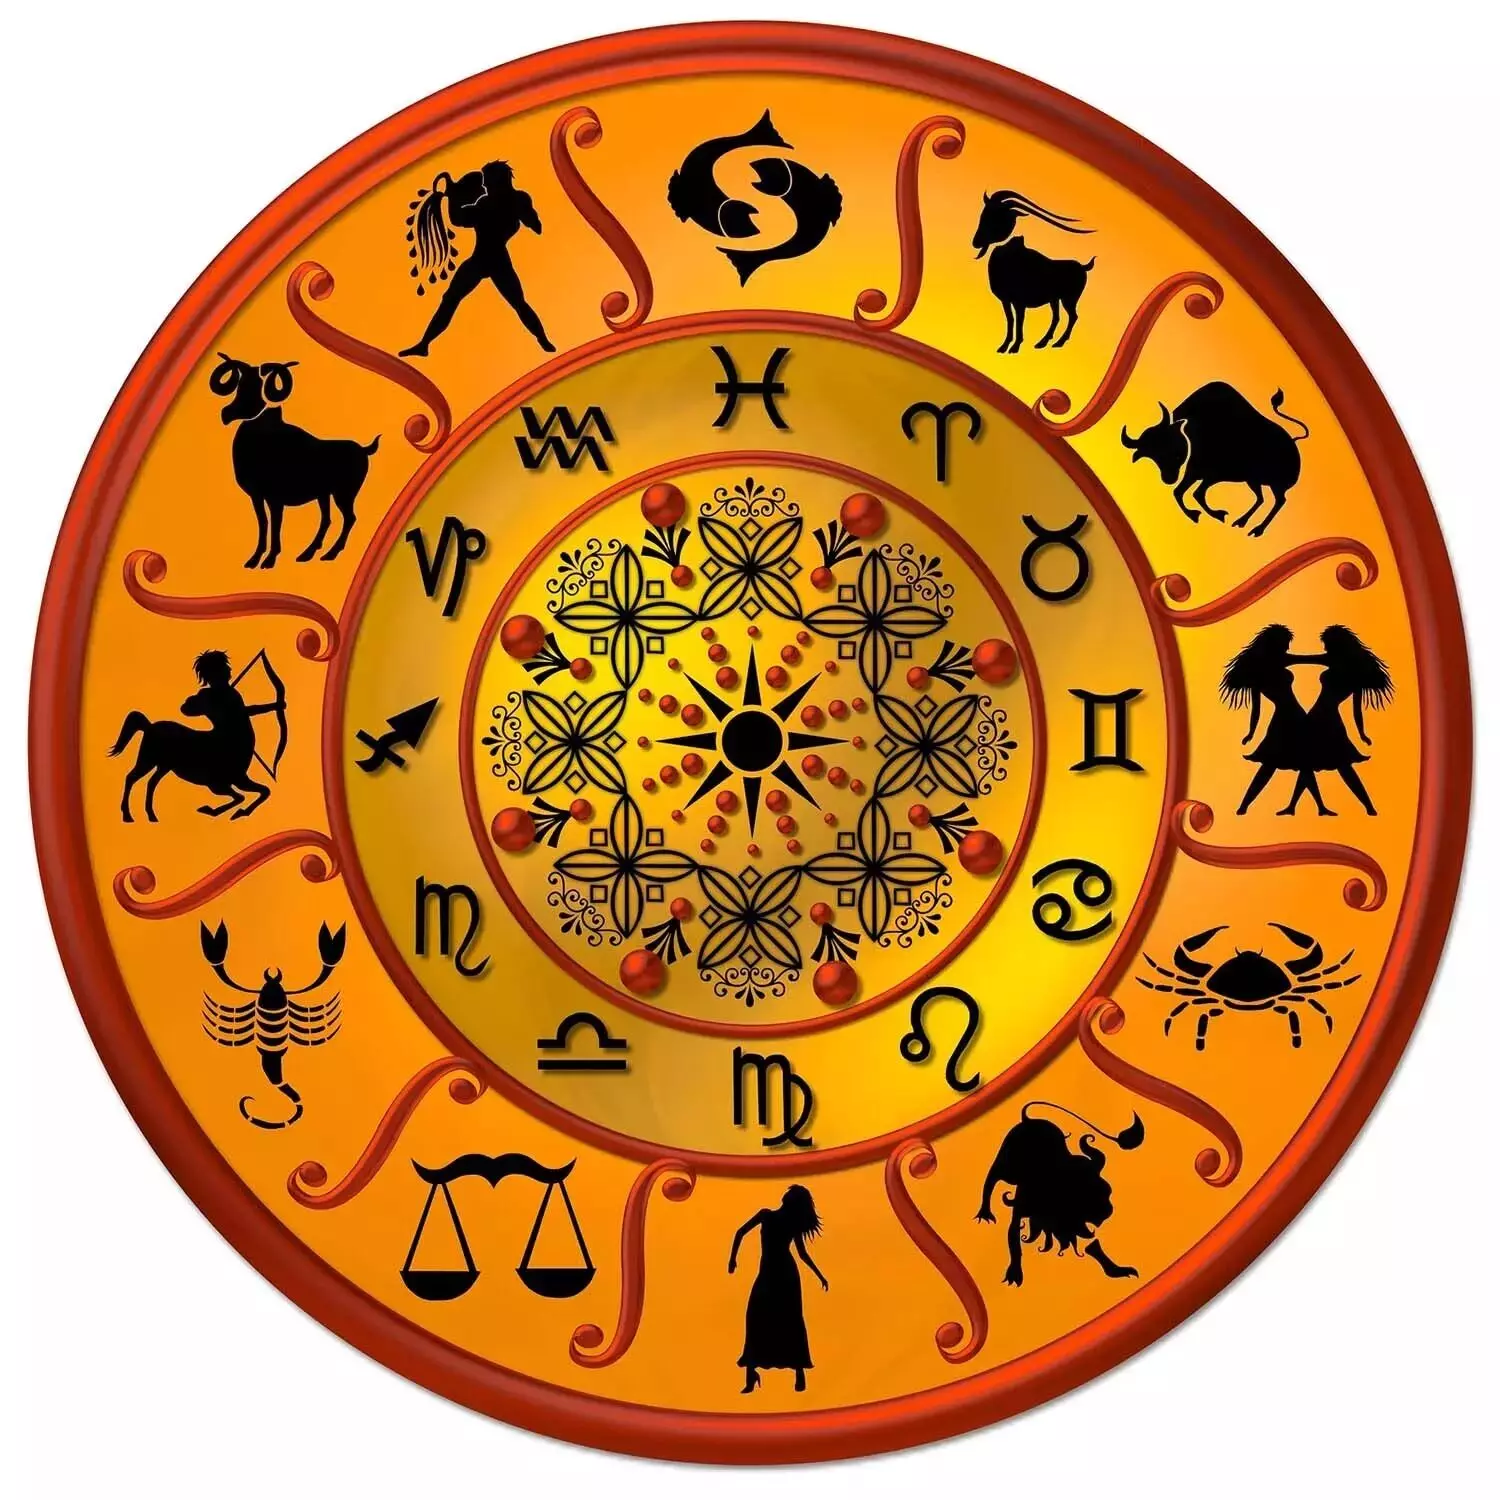 02 January   – Know your todays horoscope